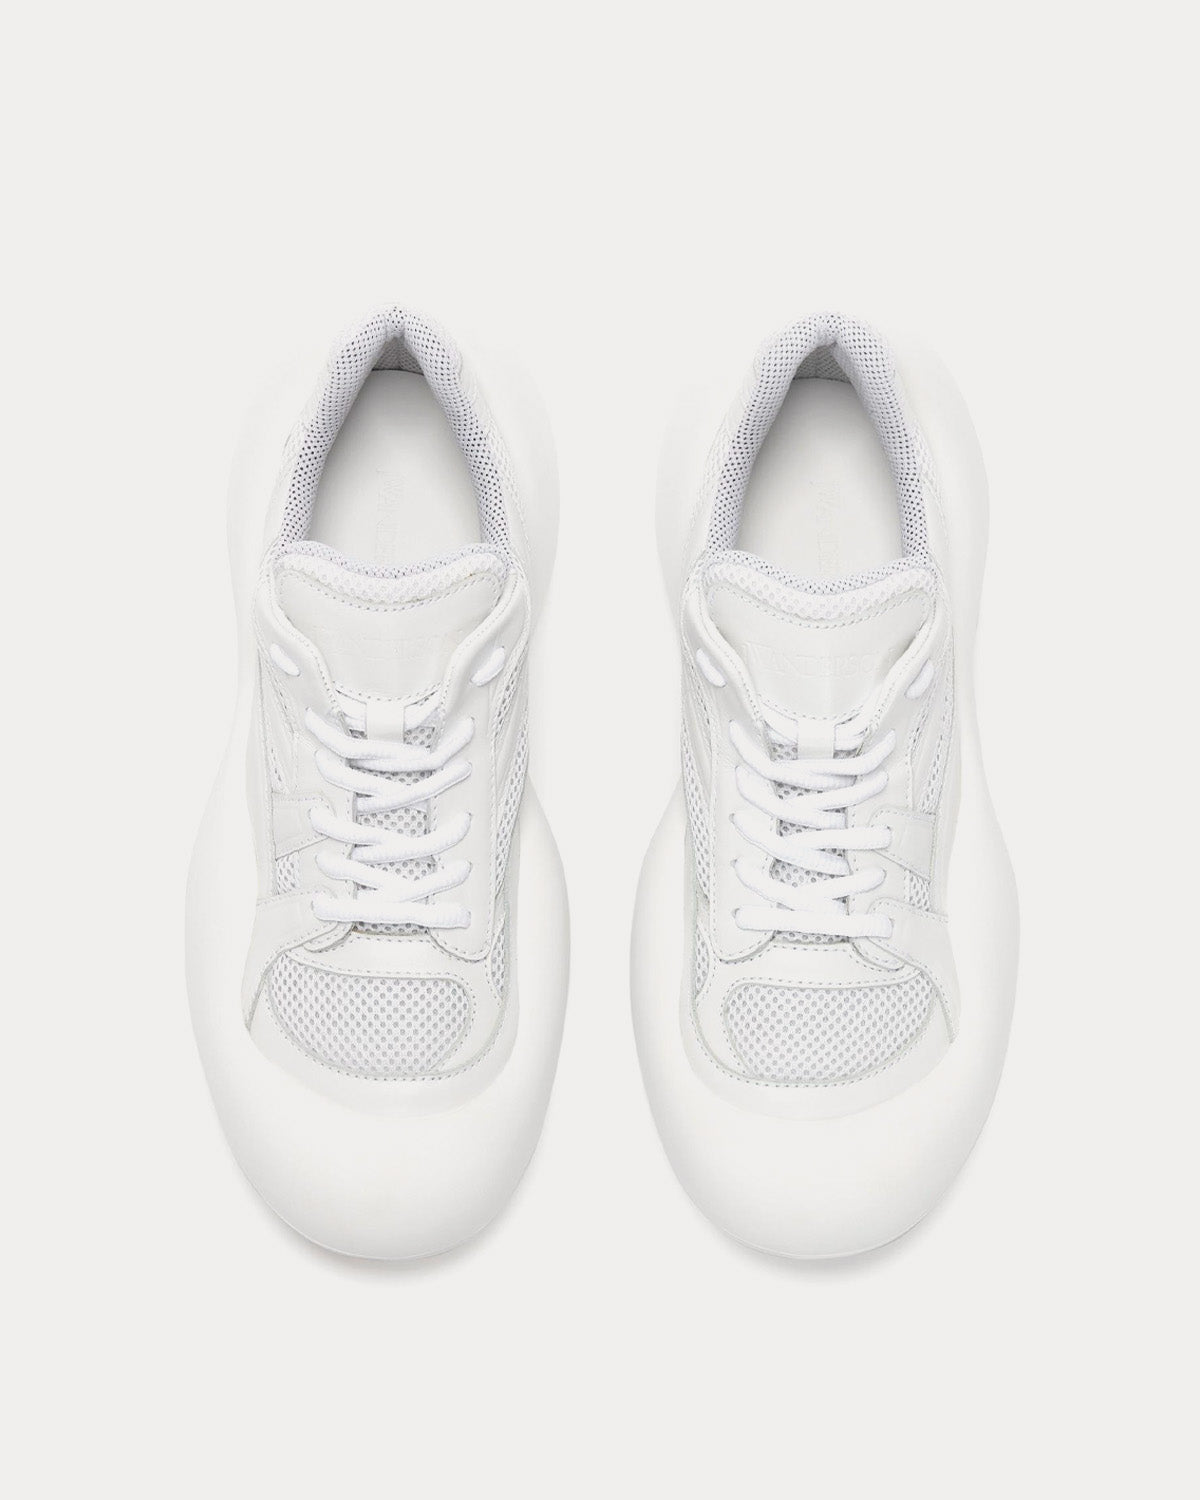 JW Anderson - Bumper-Hike White Low Top Sneakers